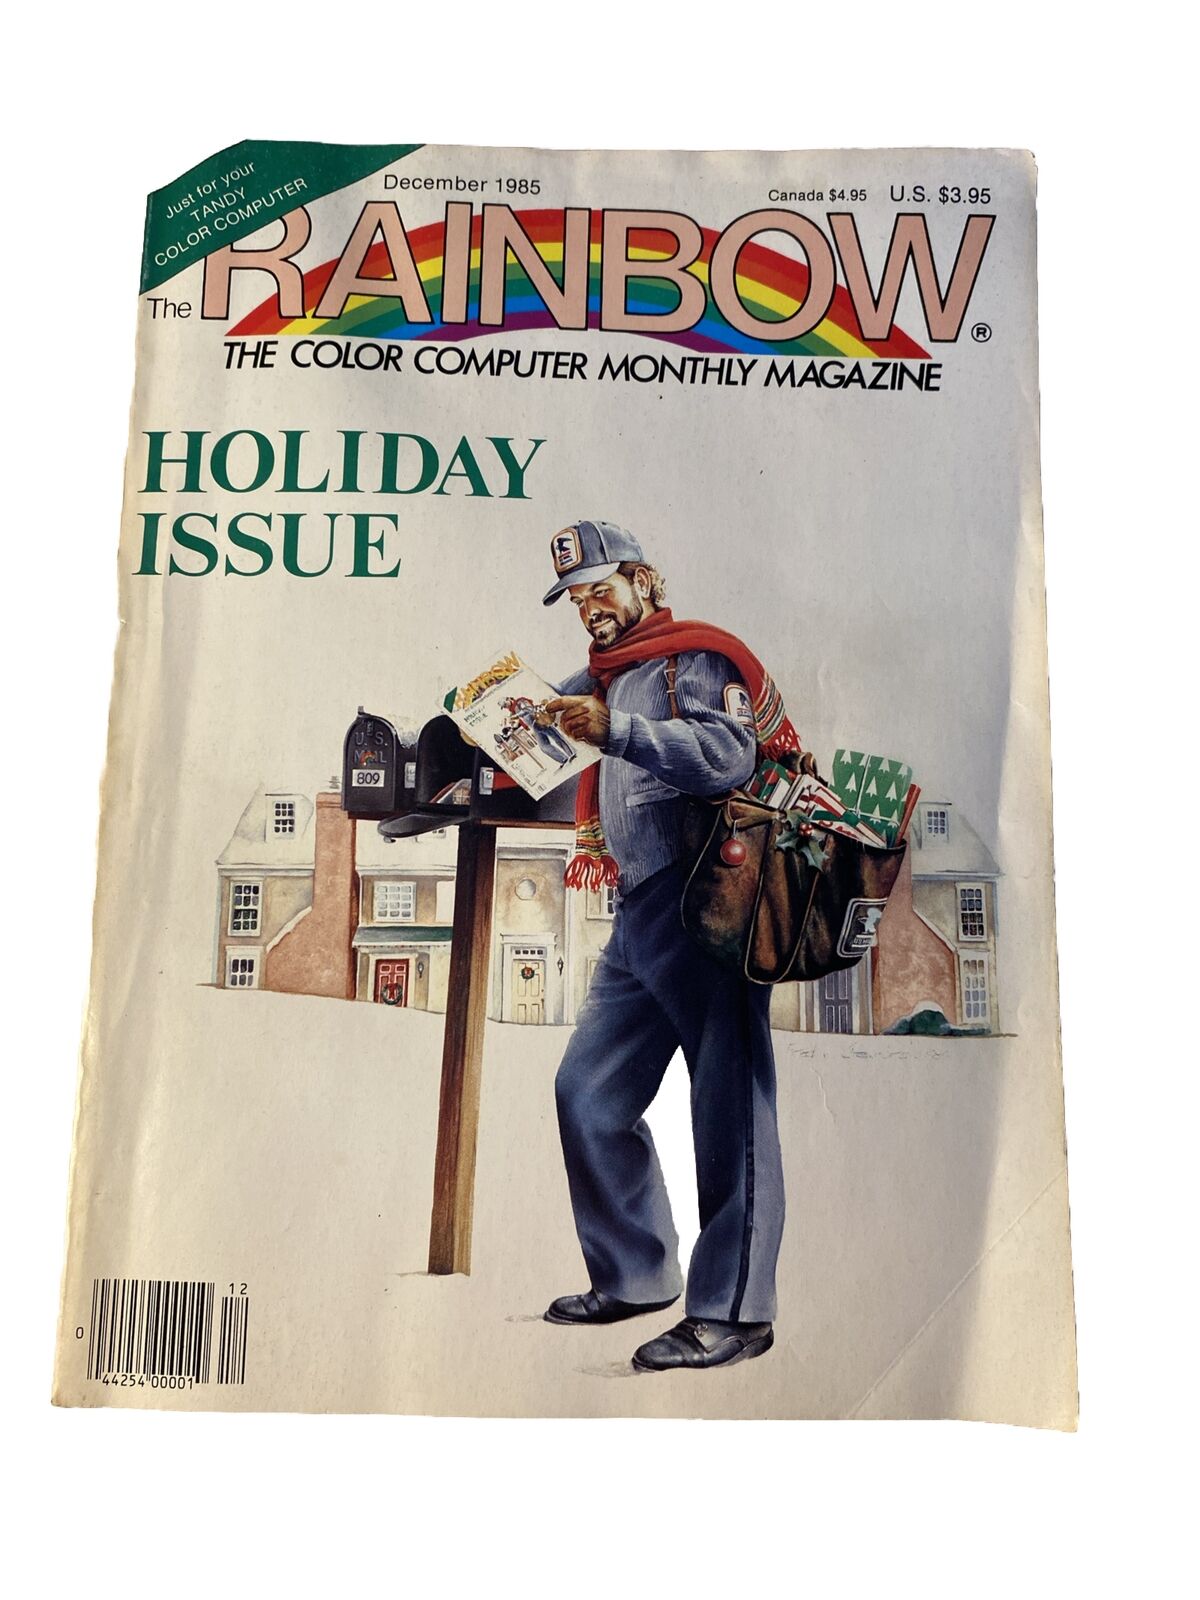 Vintage Tandy Rainbow color Computer Magazine December 1985 Holiday Issue E42